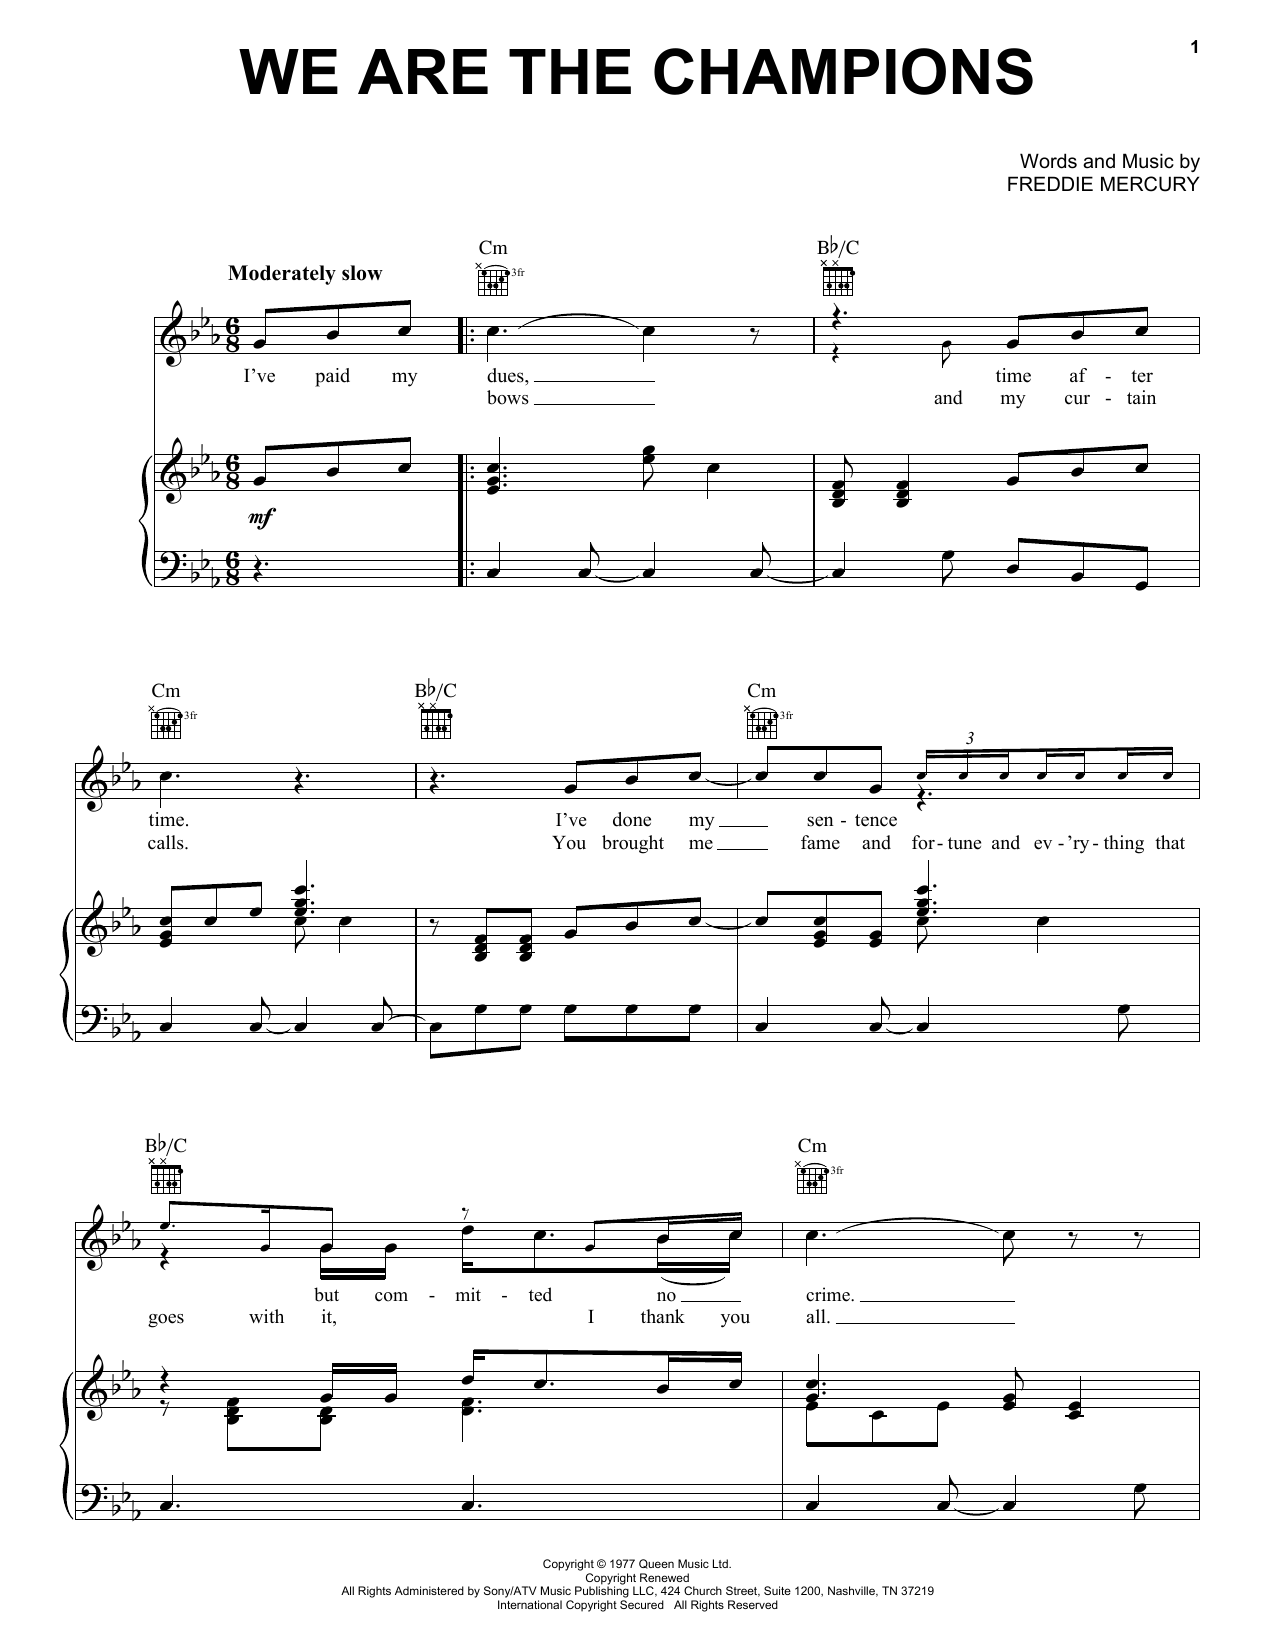 Queen We Are The Champions sheet music notes printable PDF score